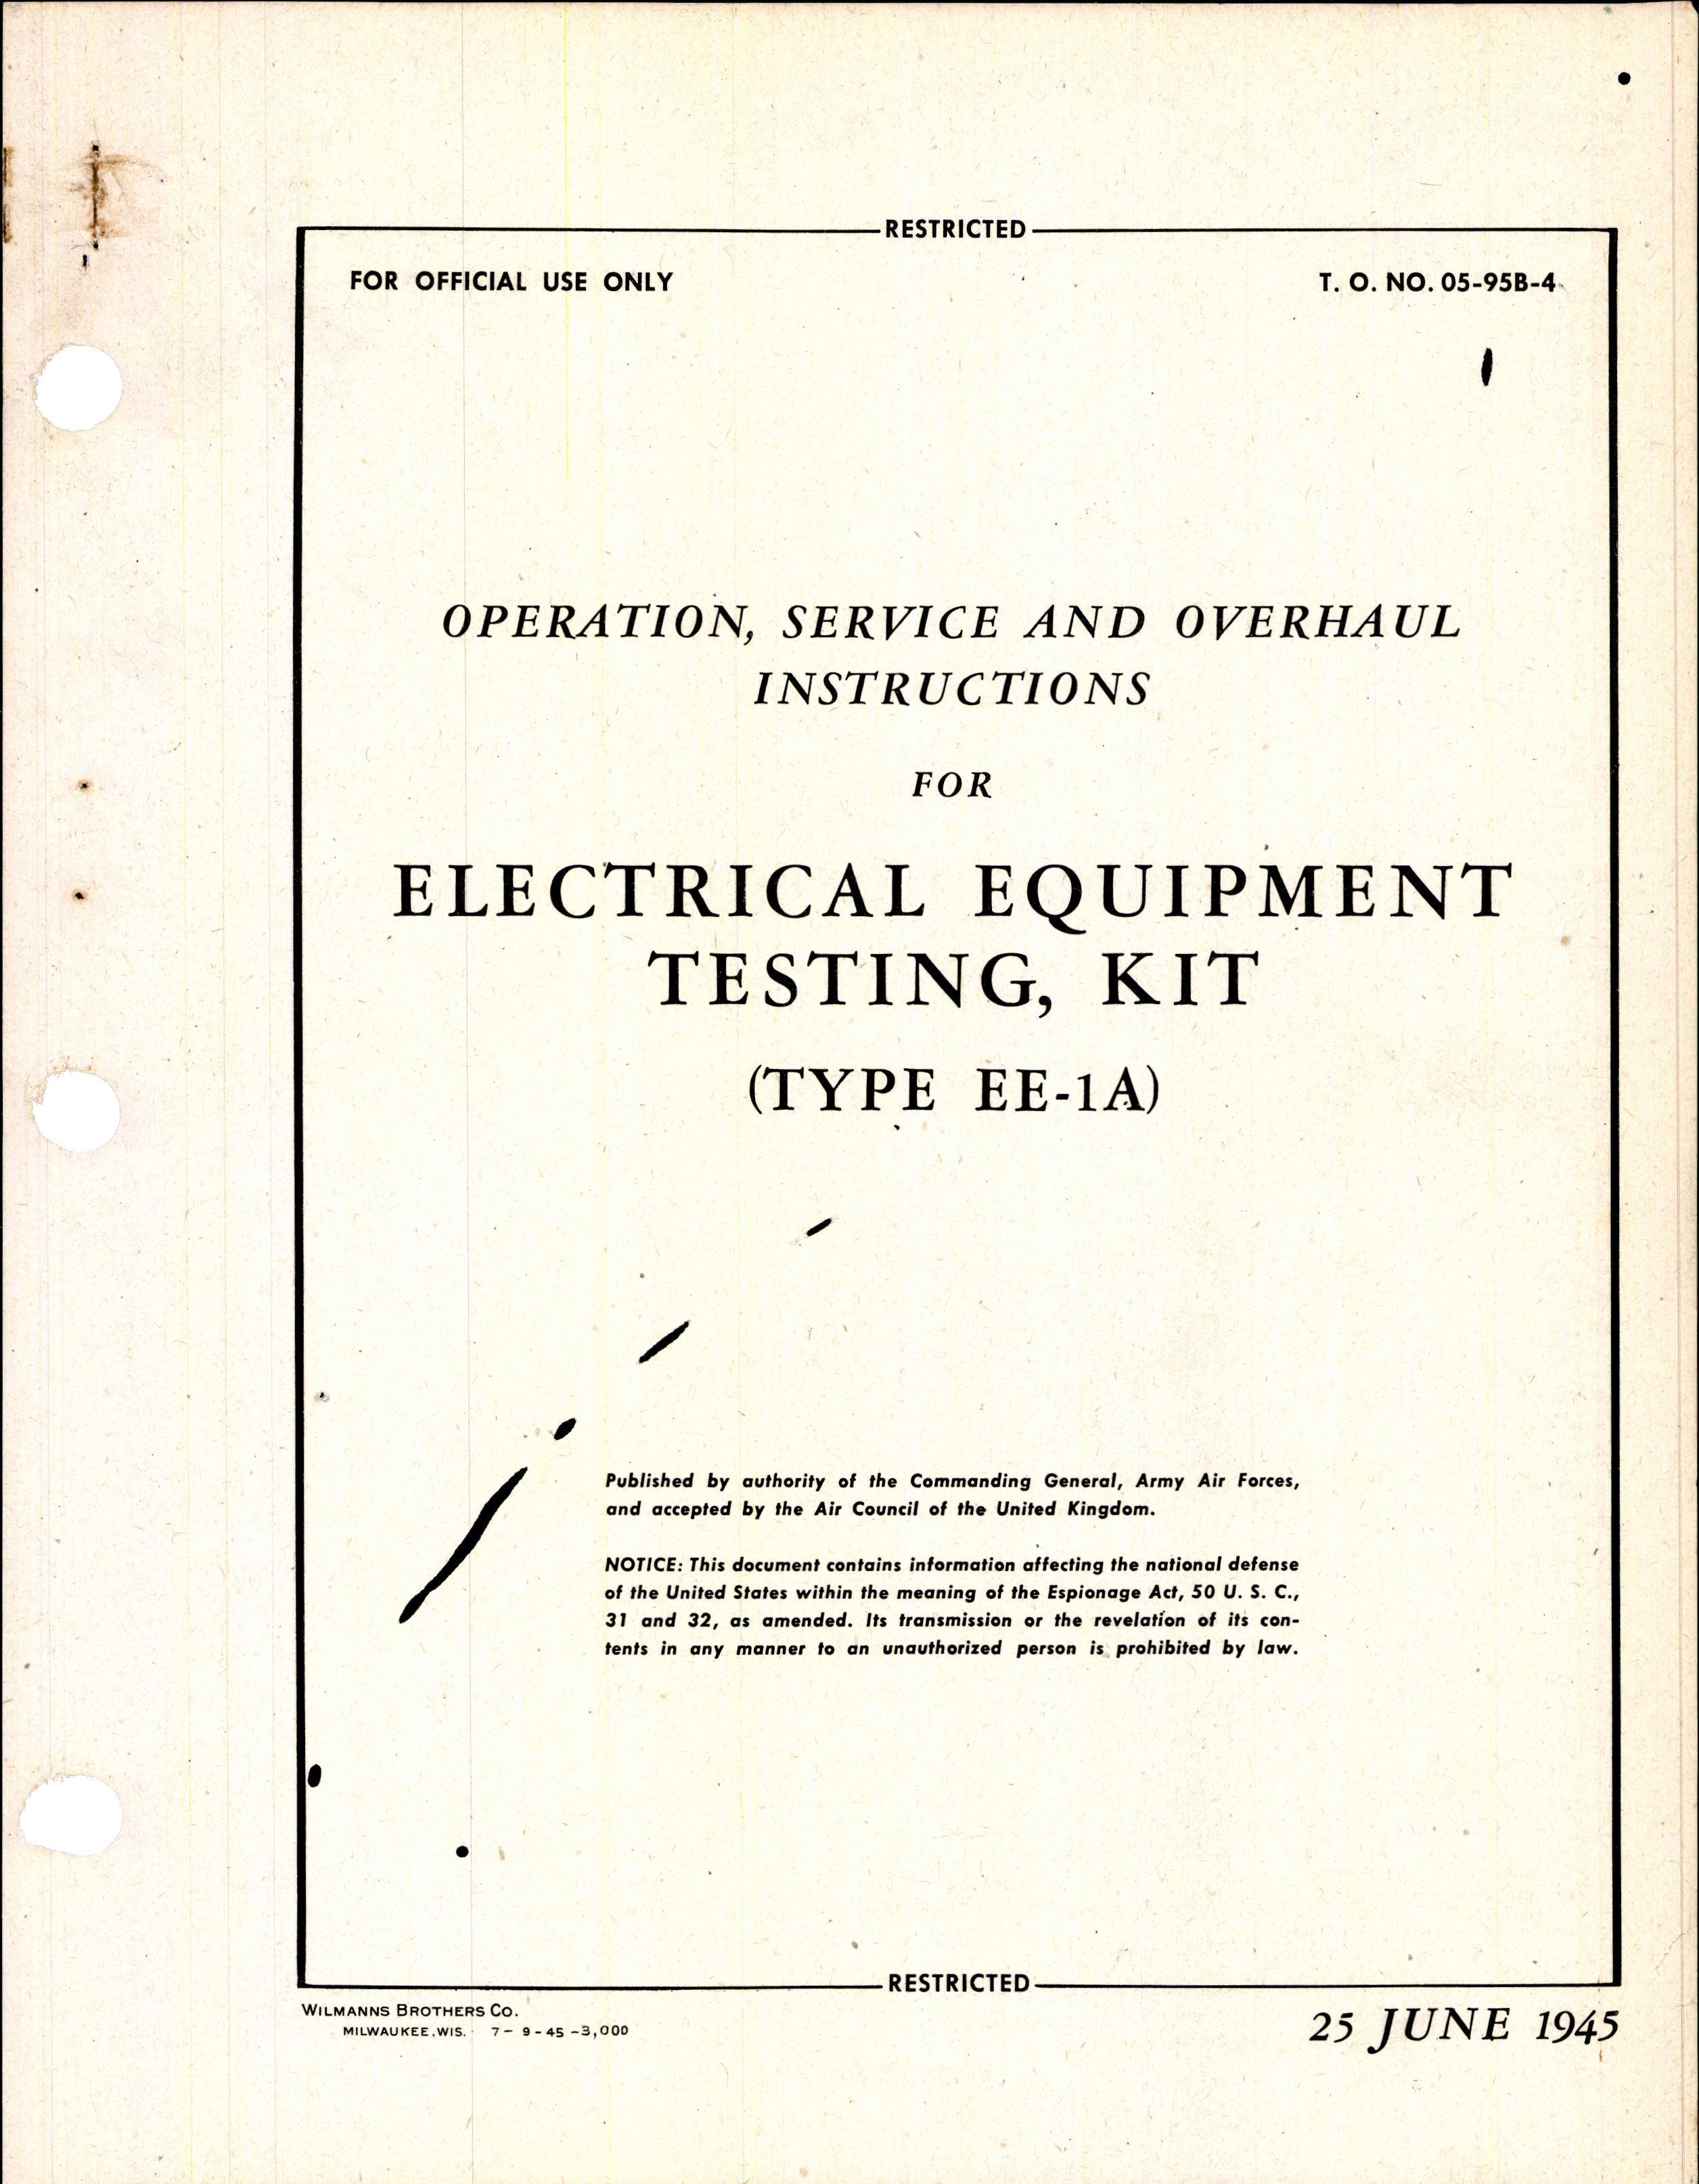 Sample page 1 from AirCorps Library document: Instructions for Electrical Equipment Testing Kit (Type EE-1A)